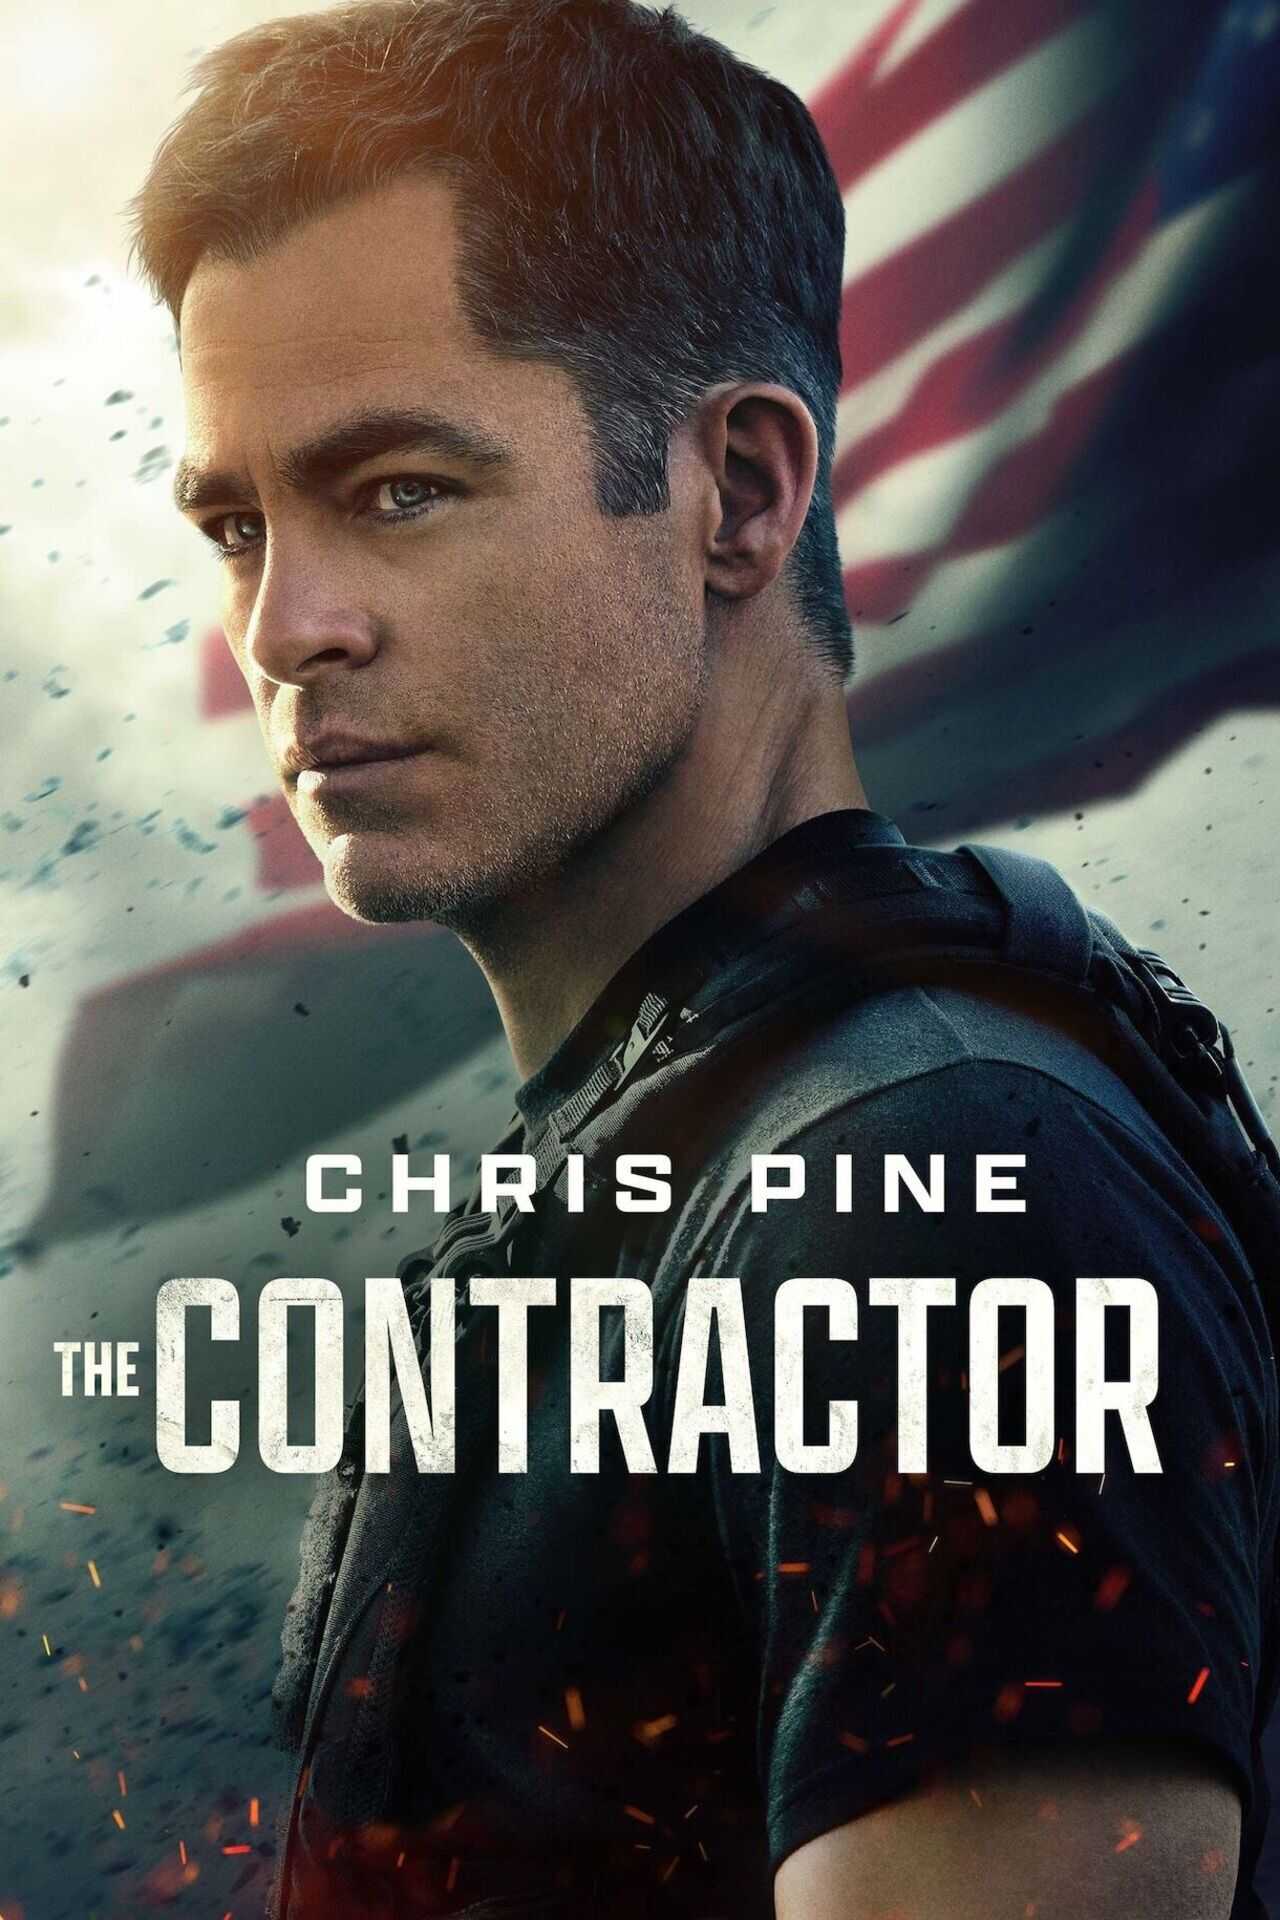 Theatrical poster for The Contractor.